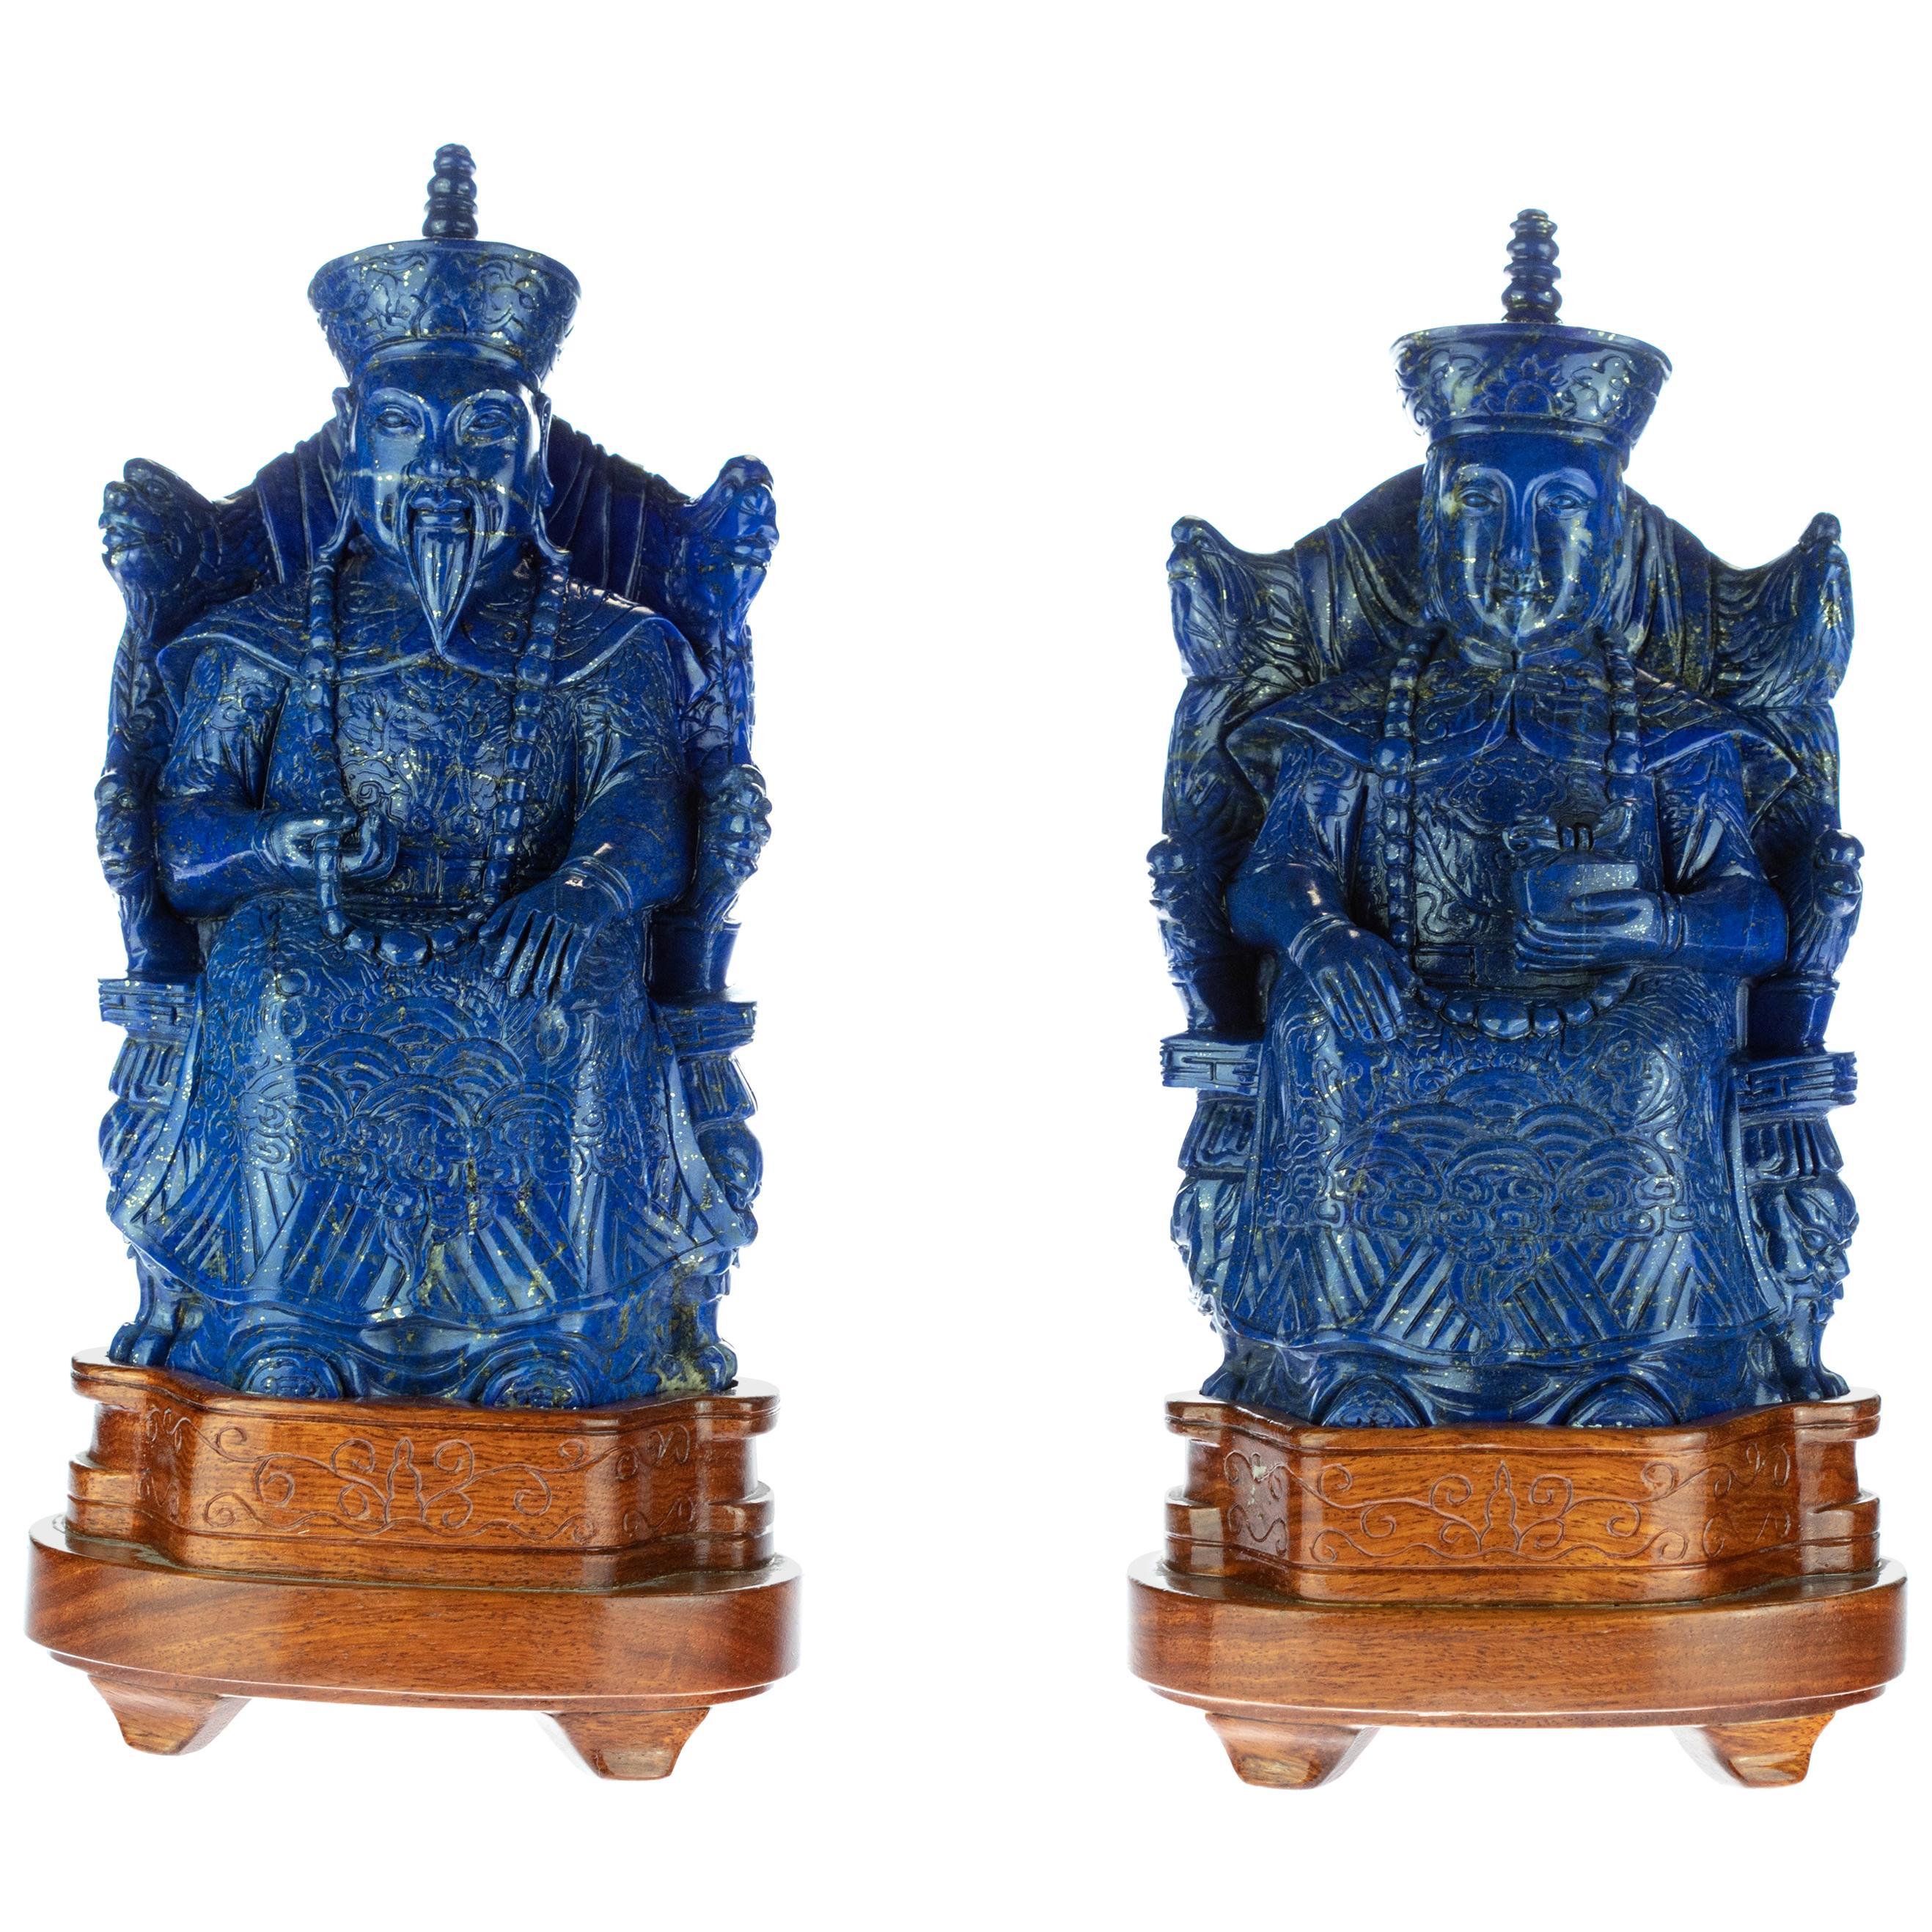 Lapis Lazuli King Queen Carved Blue Gemstone Artisanal Royalty Statue Sculpture For Sale